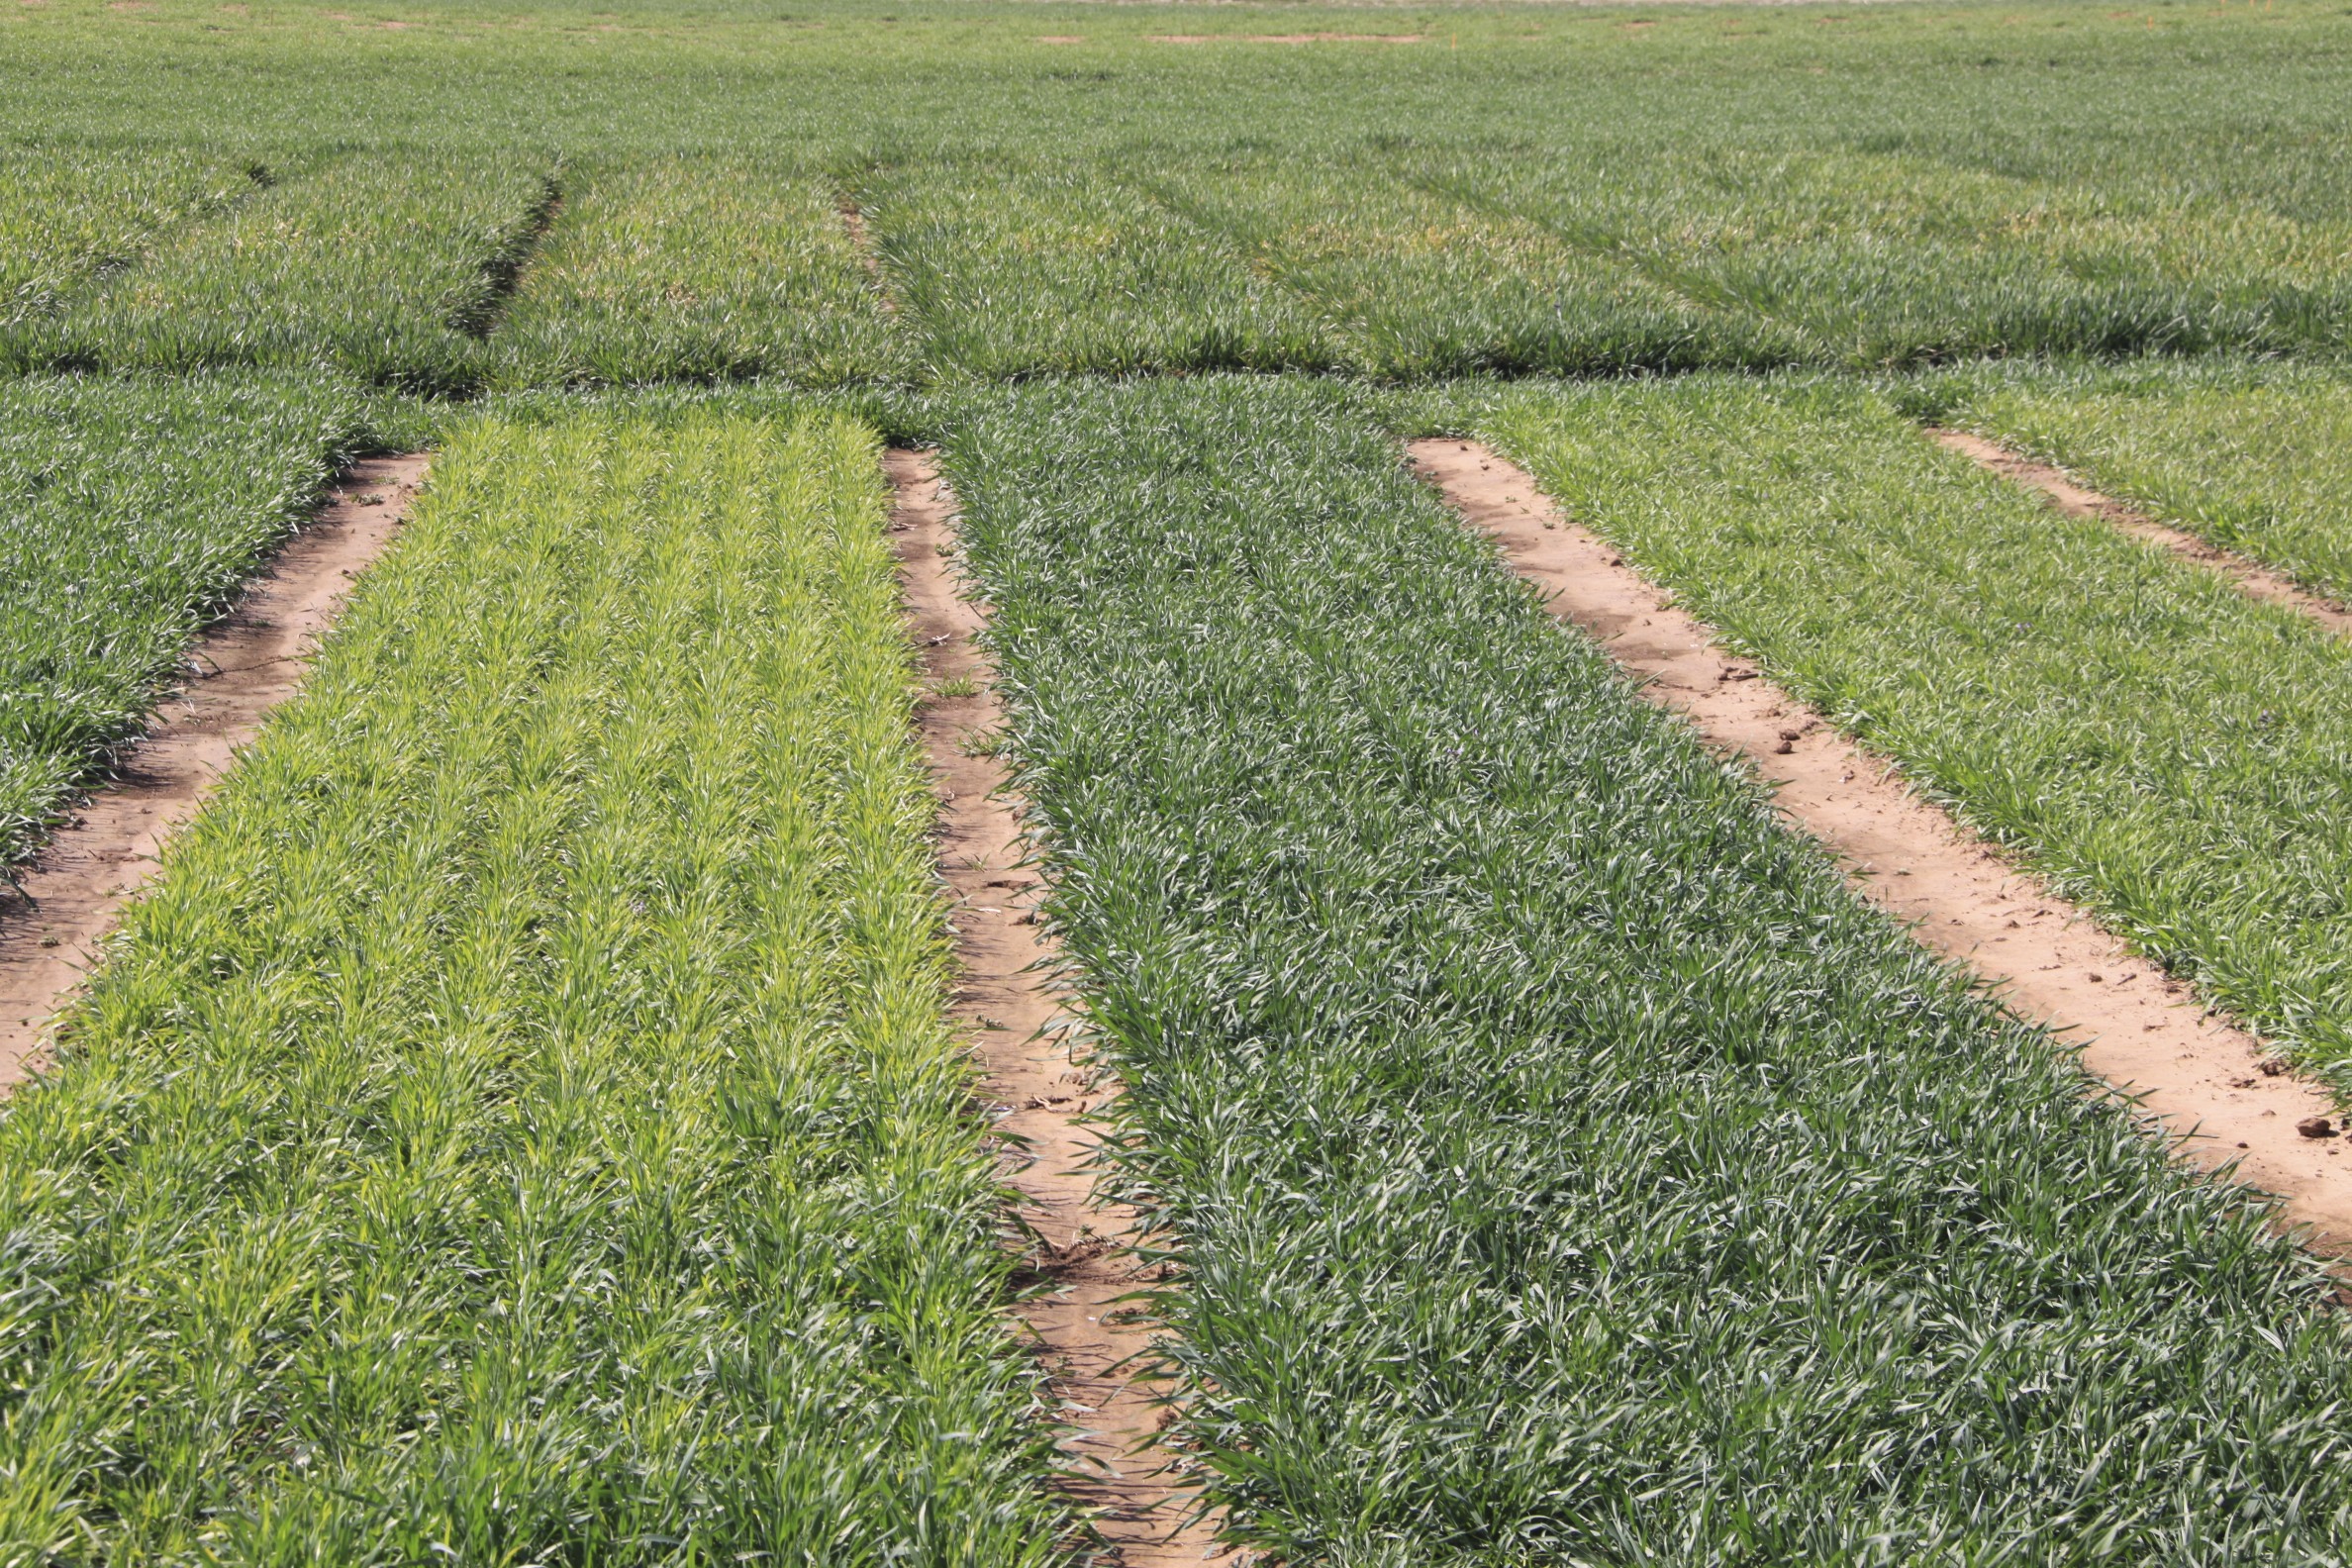 Wheat soilborne mosaic virus can cause yellowing in the spring in susceptible varieties such as the one on the left.